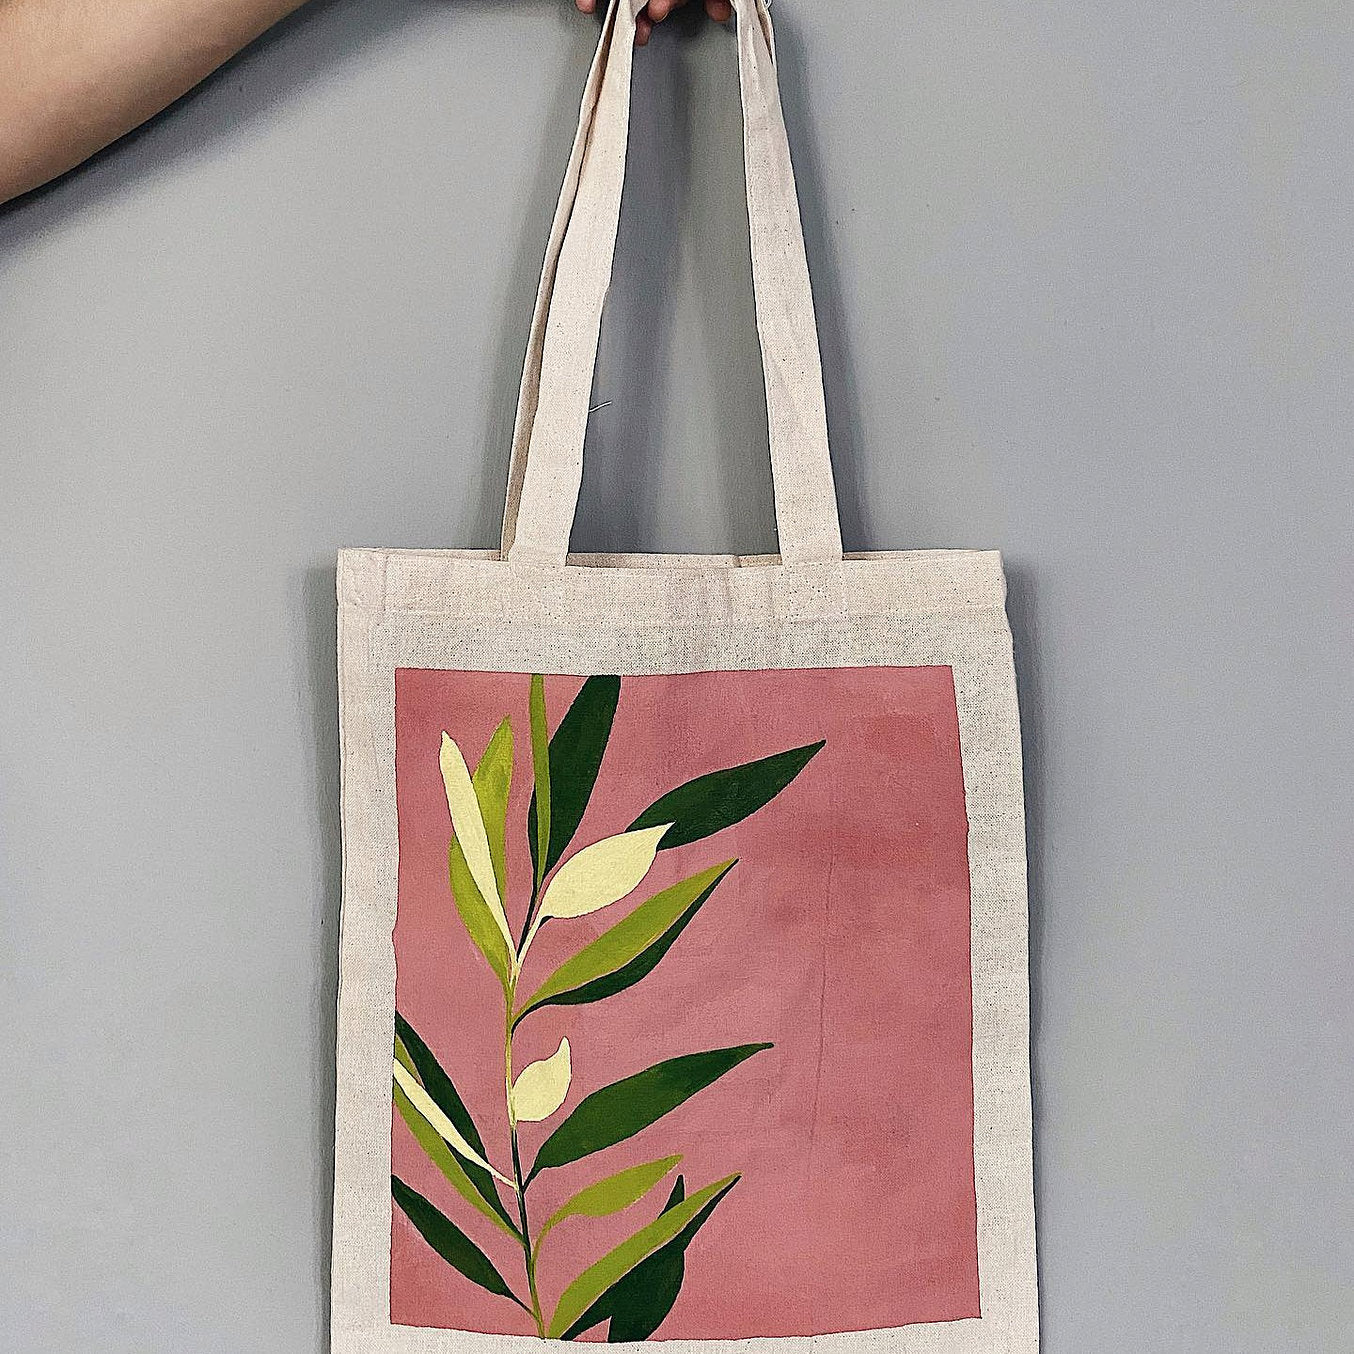 DIY Canvas Tote Bag With Potato Stamp Design - 5 Minutes for Mom